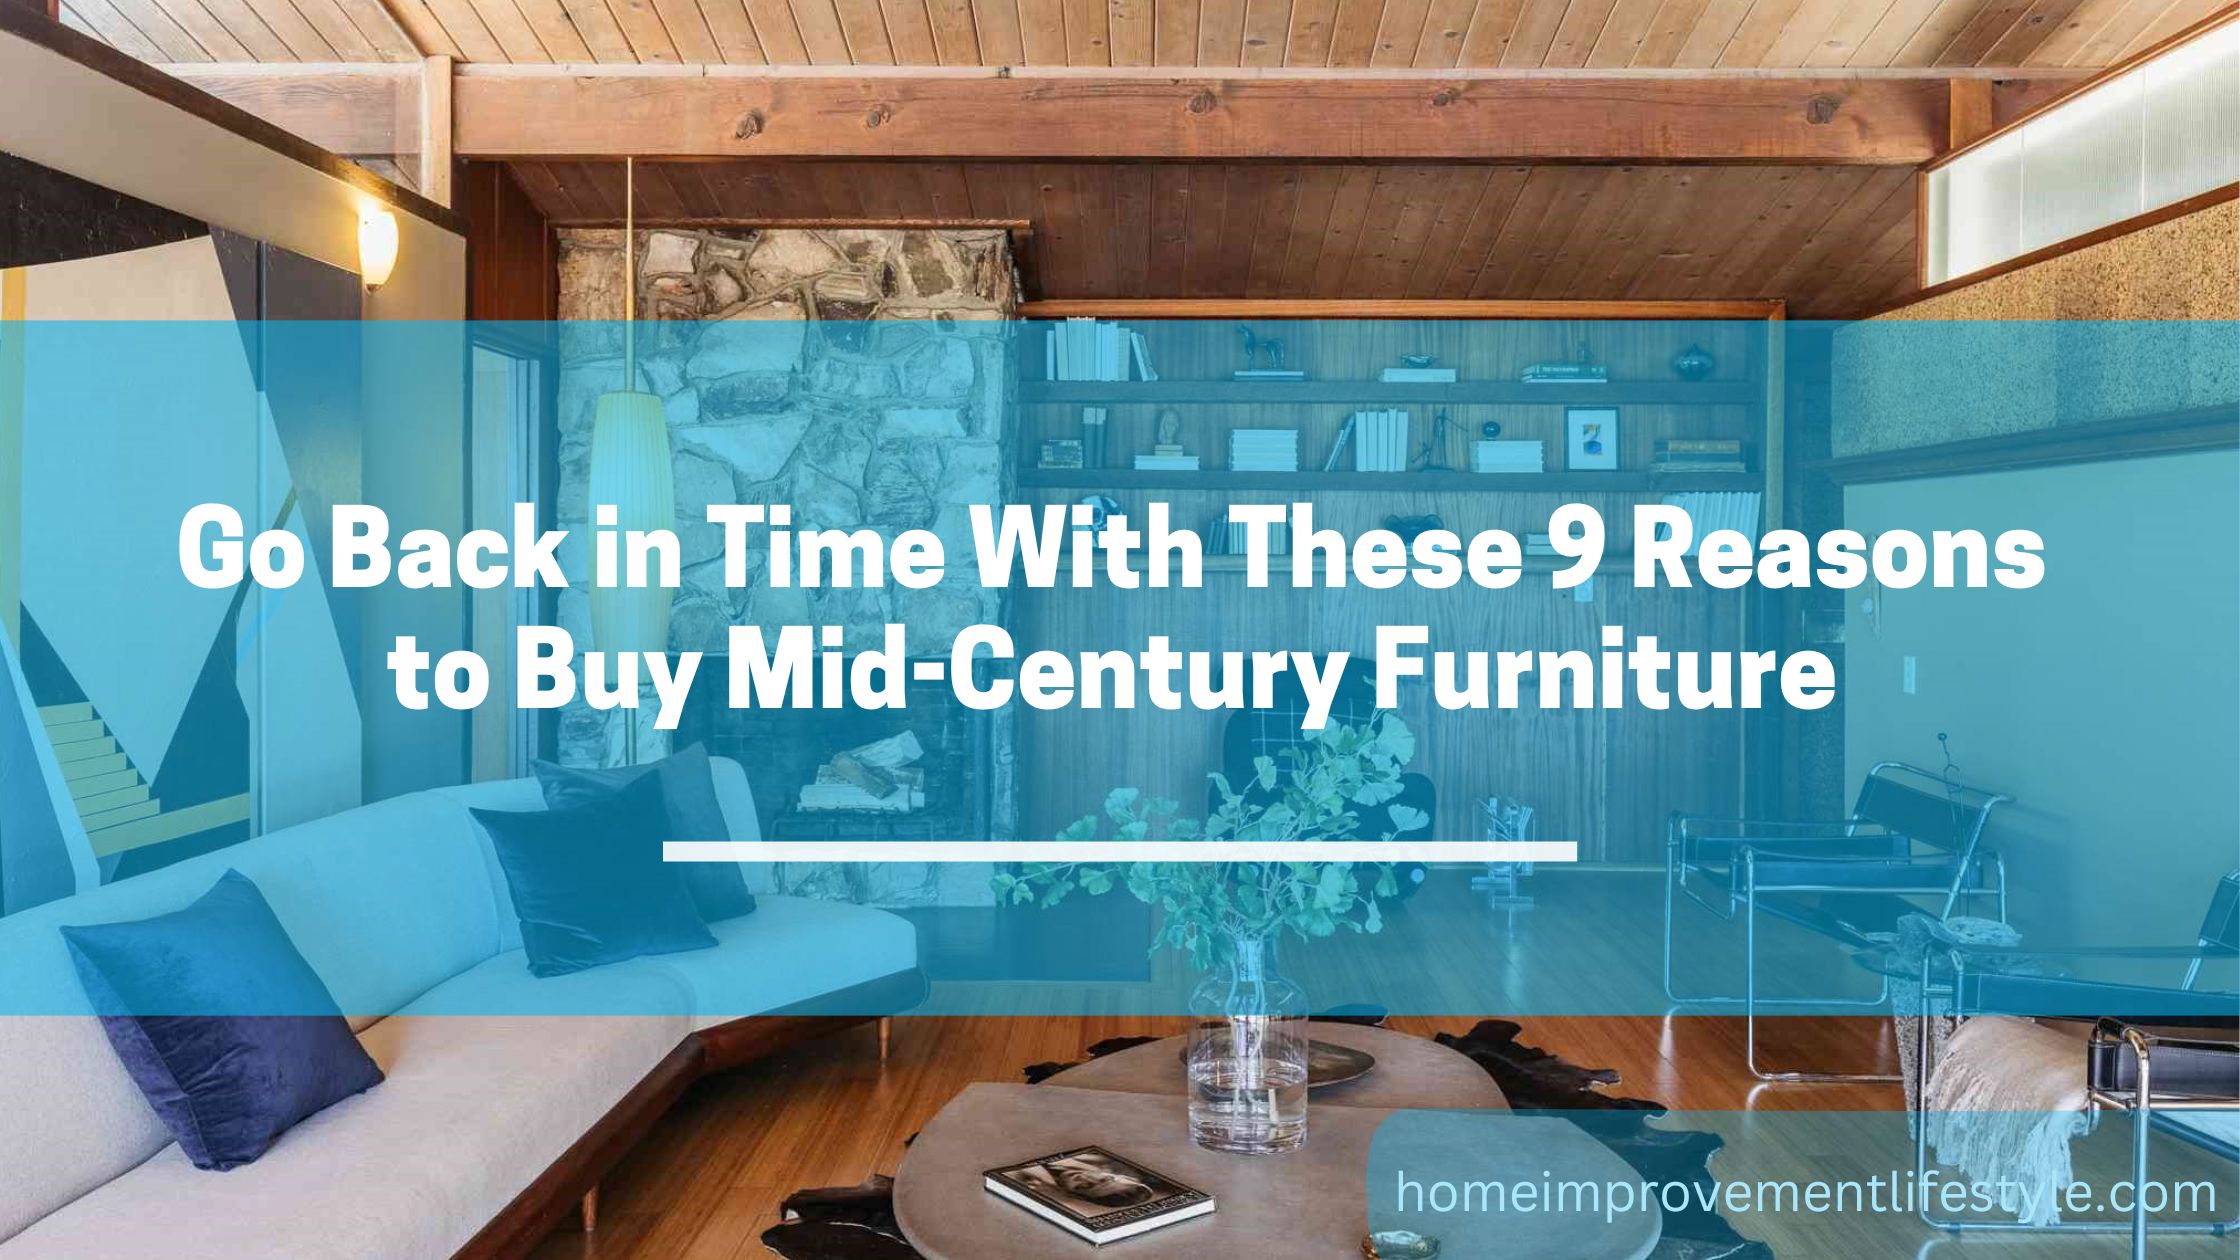 Go Back in Time With These 9 Reasons to Buy Mid-Century Furniture